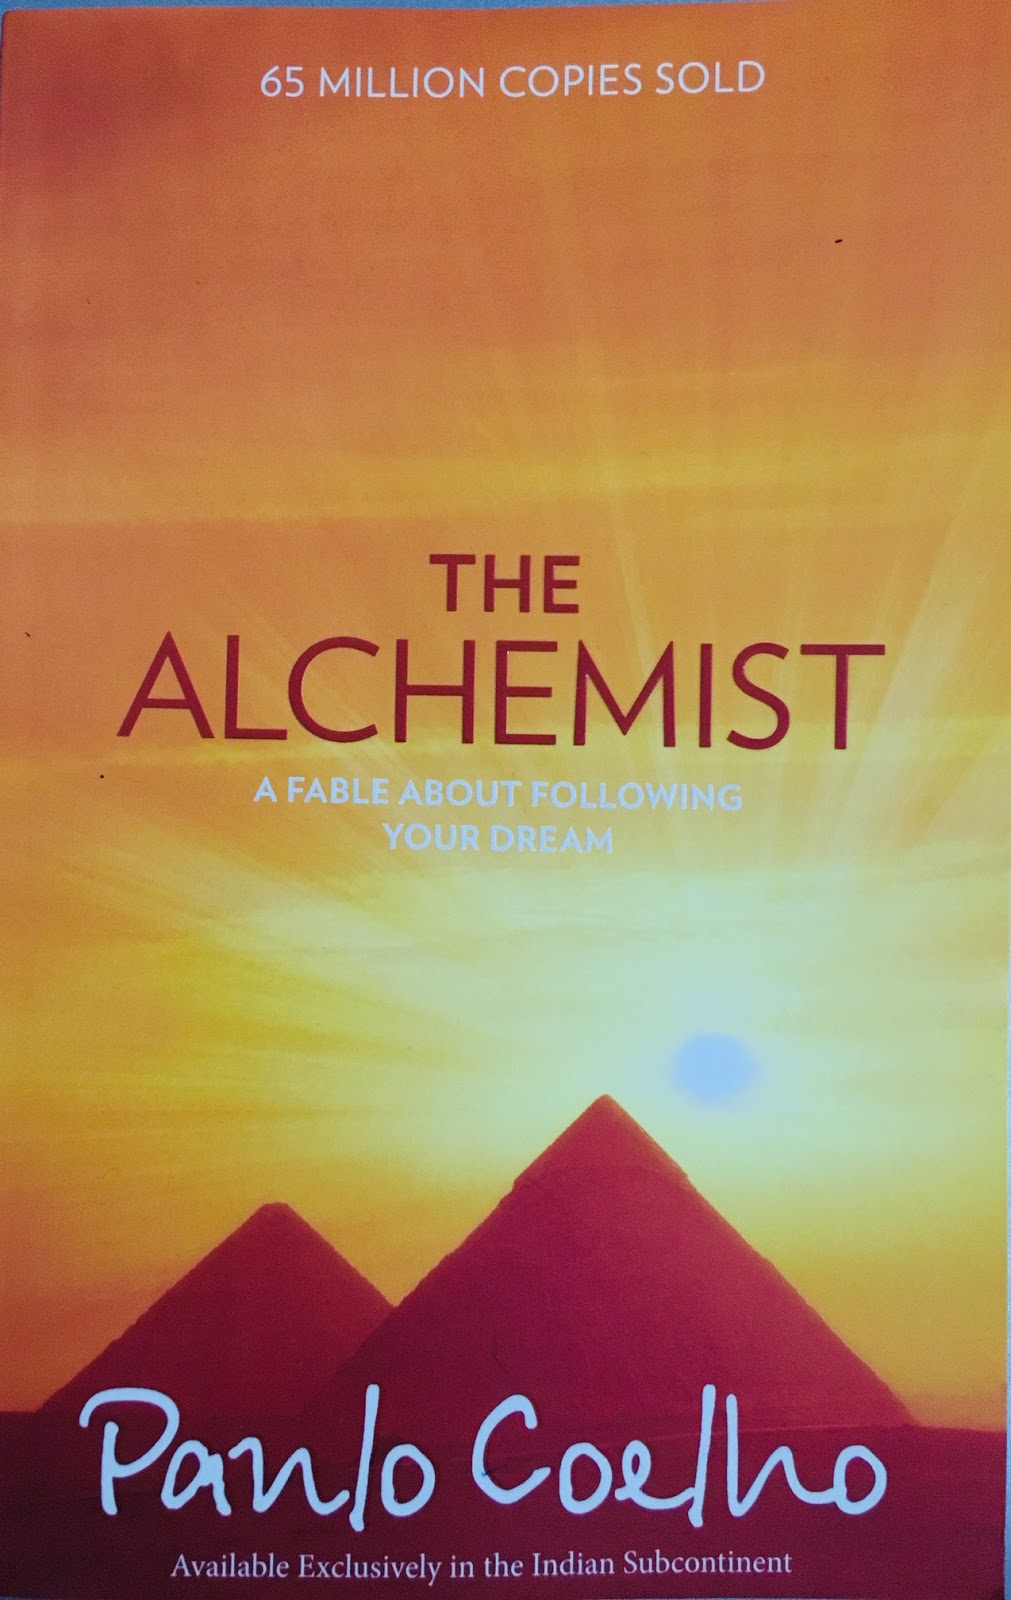 book review of the alchemist